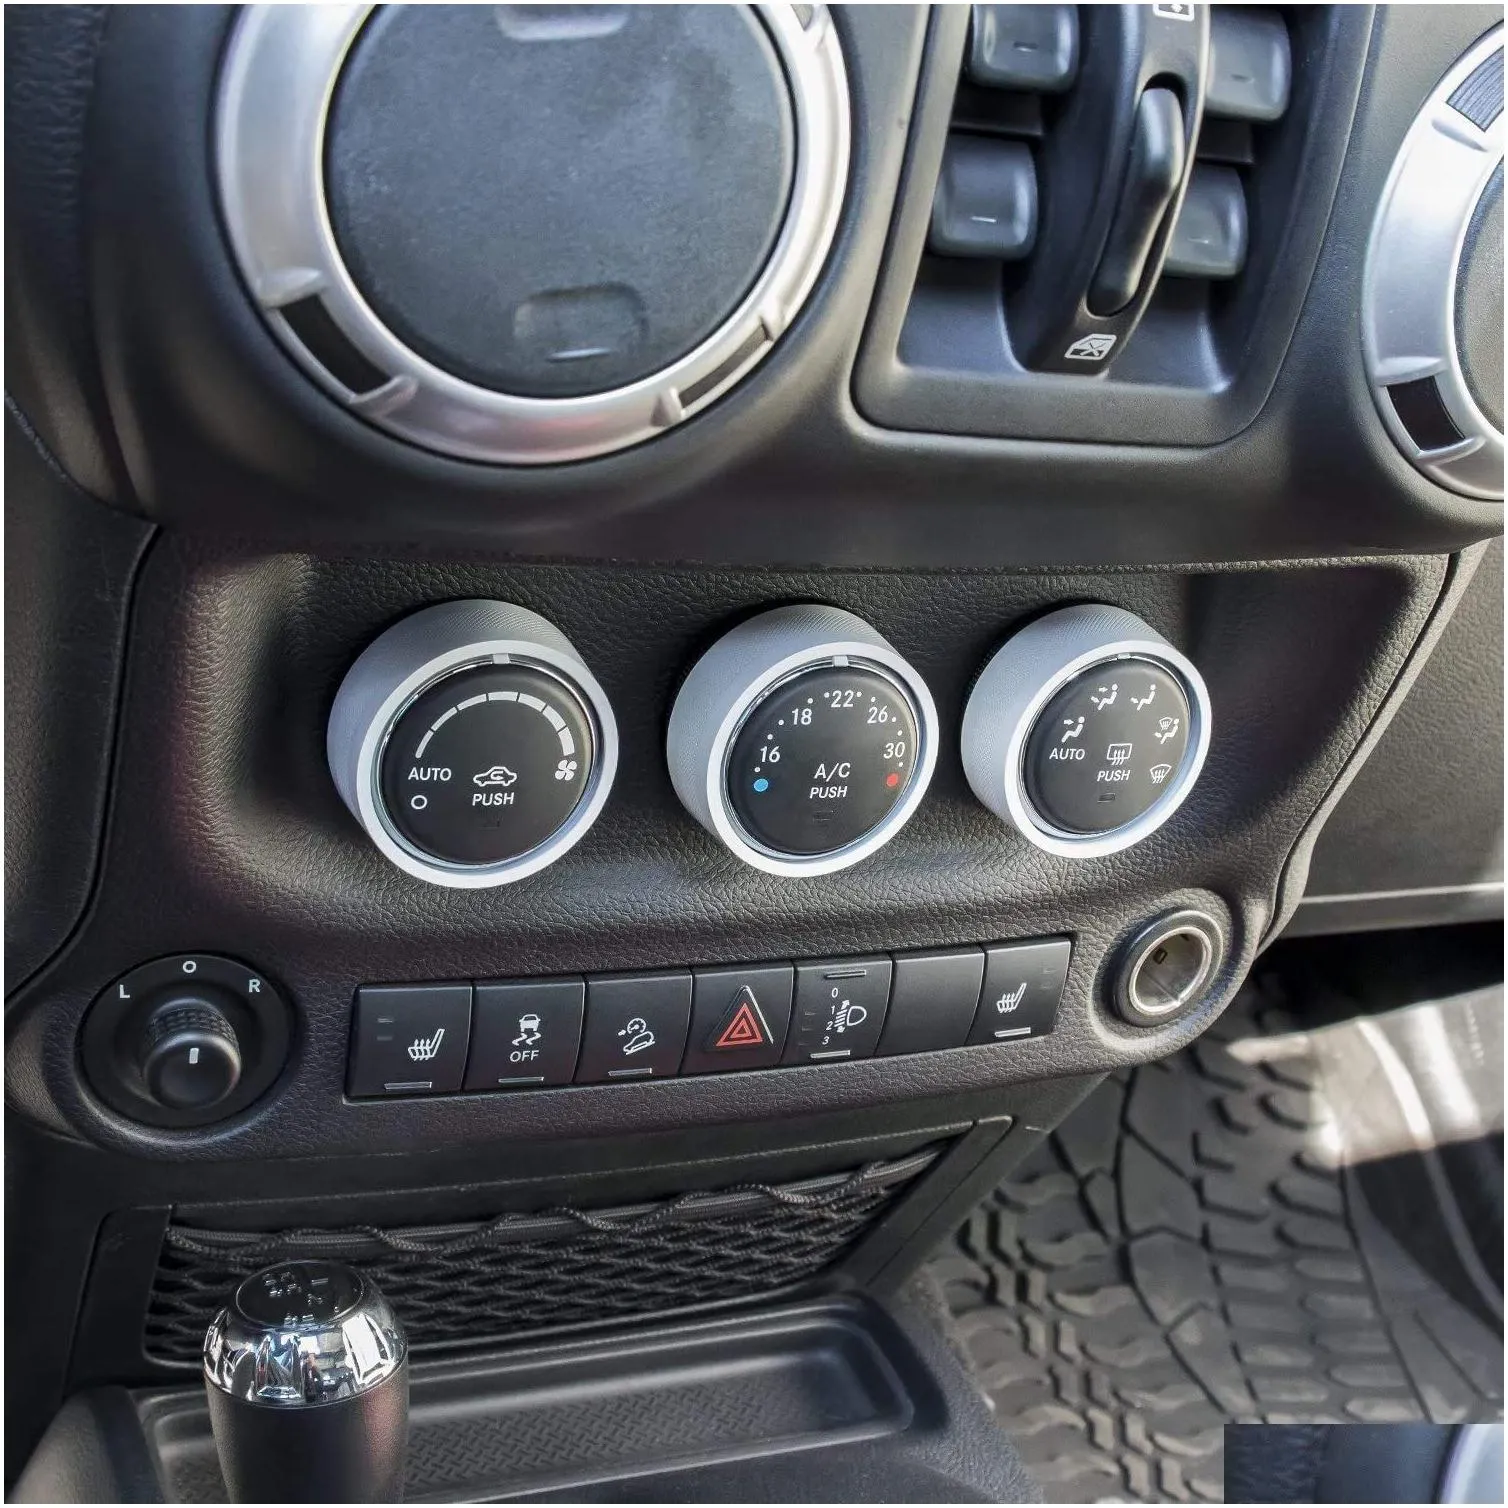 audio air conditioning button cover decoration twist switch ring trim interior accessories for jeep wrangler jk 2011-2018/10-17